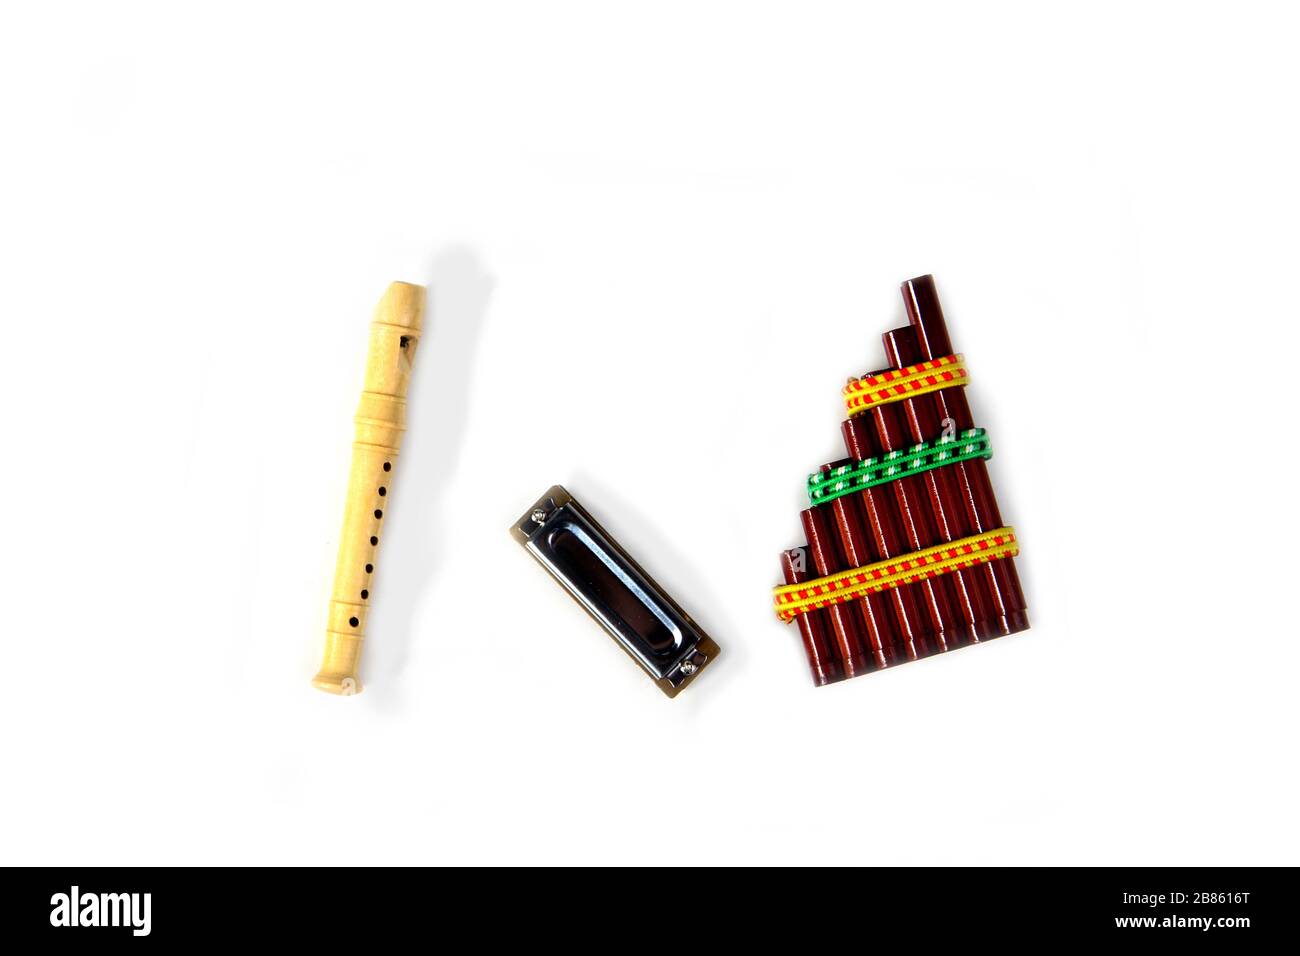 Pan flute, mouth organ and blockflute isolated on white background flat lay. Image contains copy space Stock Photo